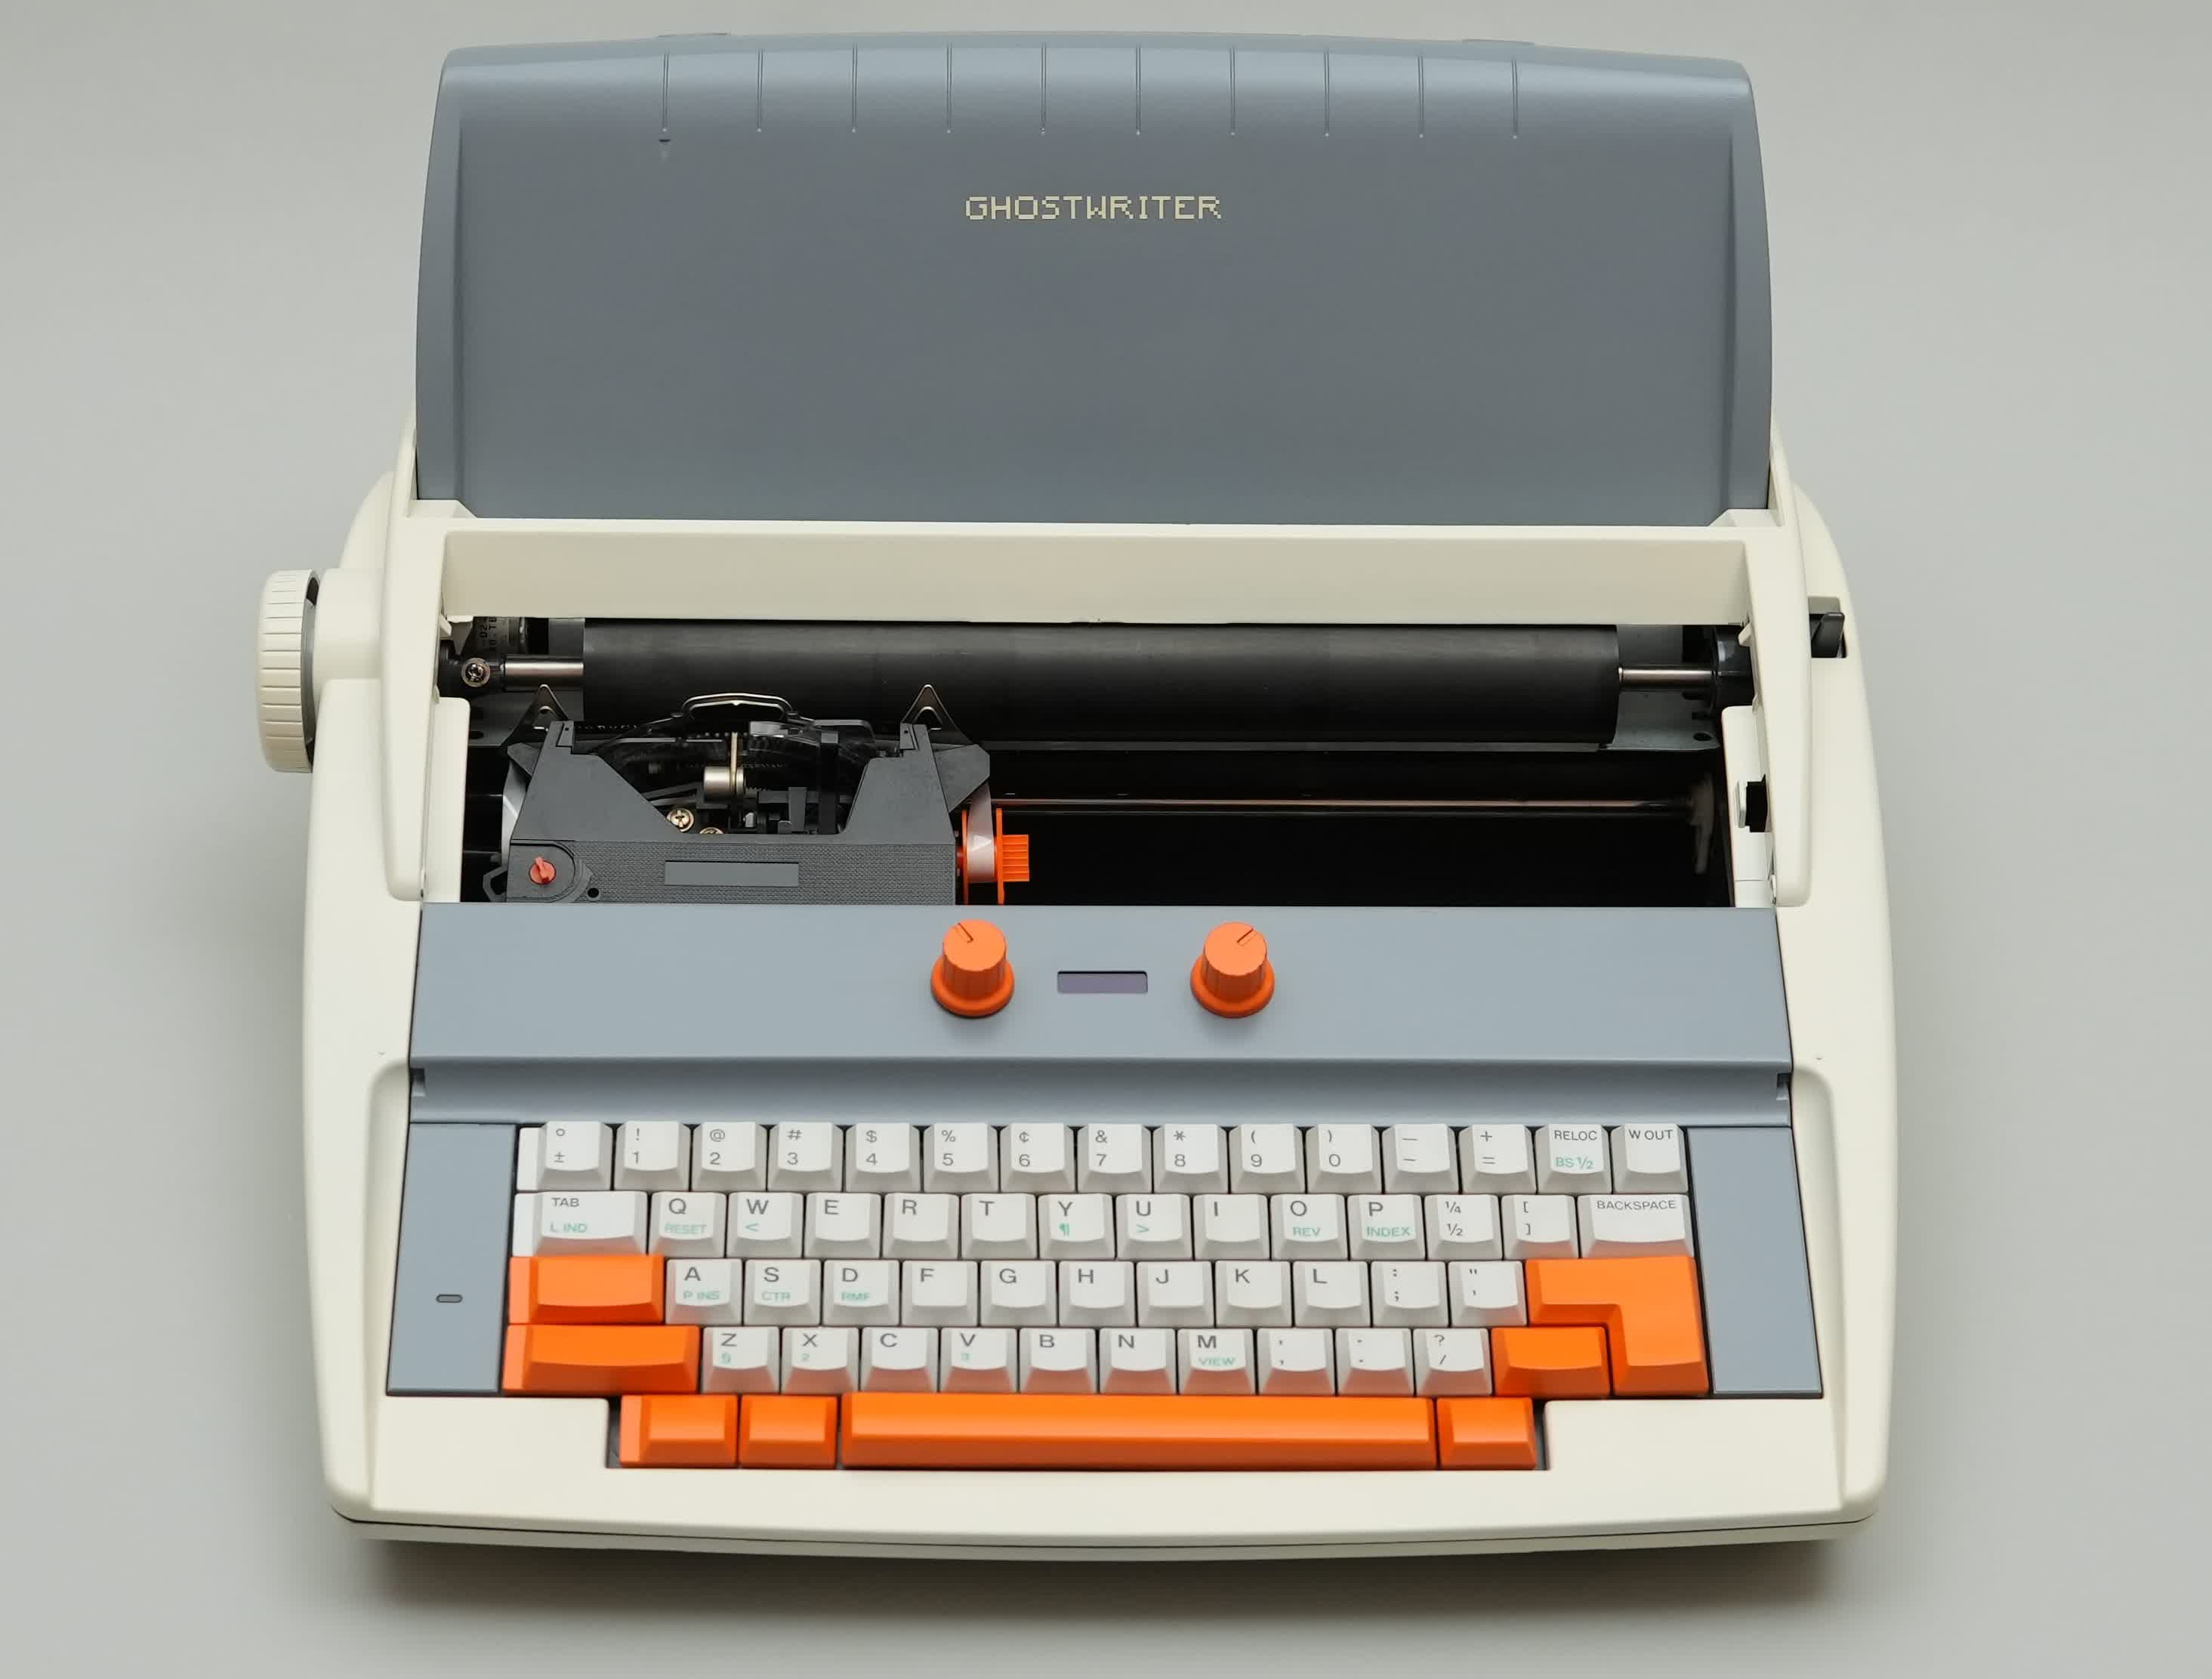 Ghostwriter is an AI creative writing companion living in a typewriter